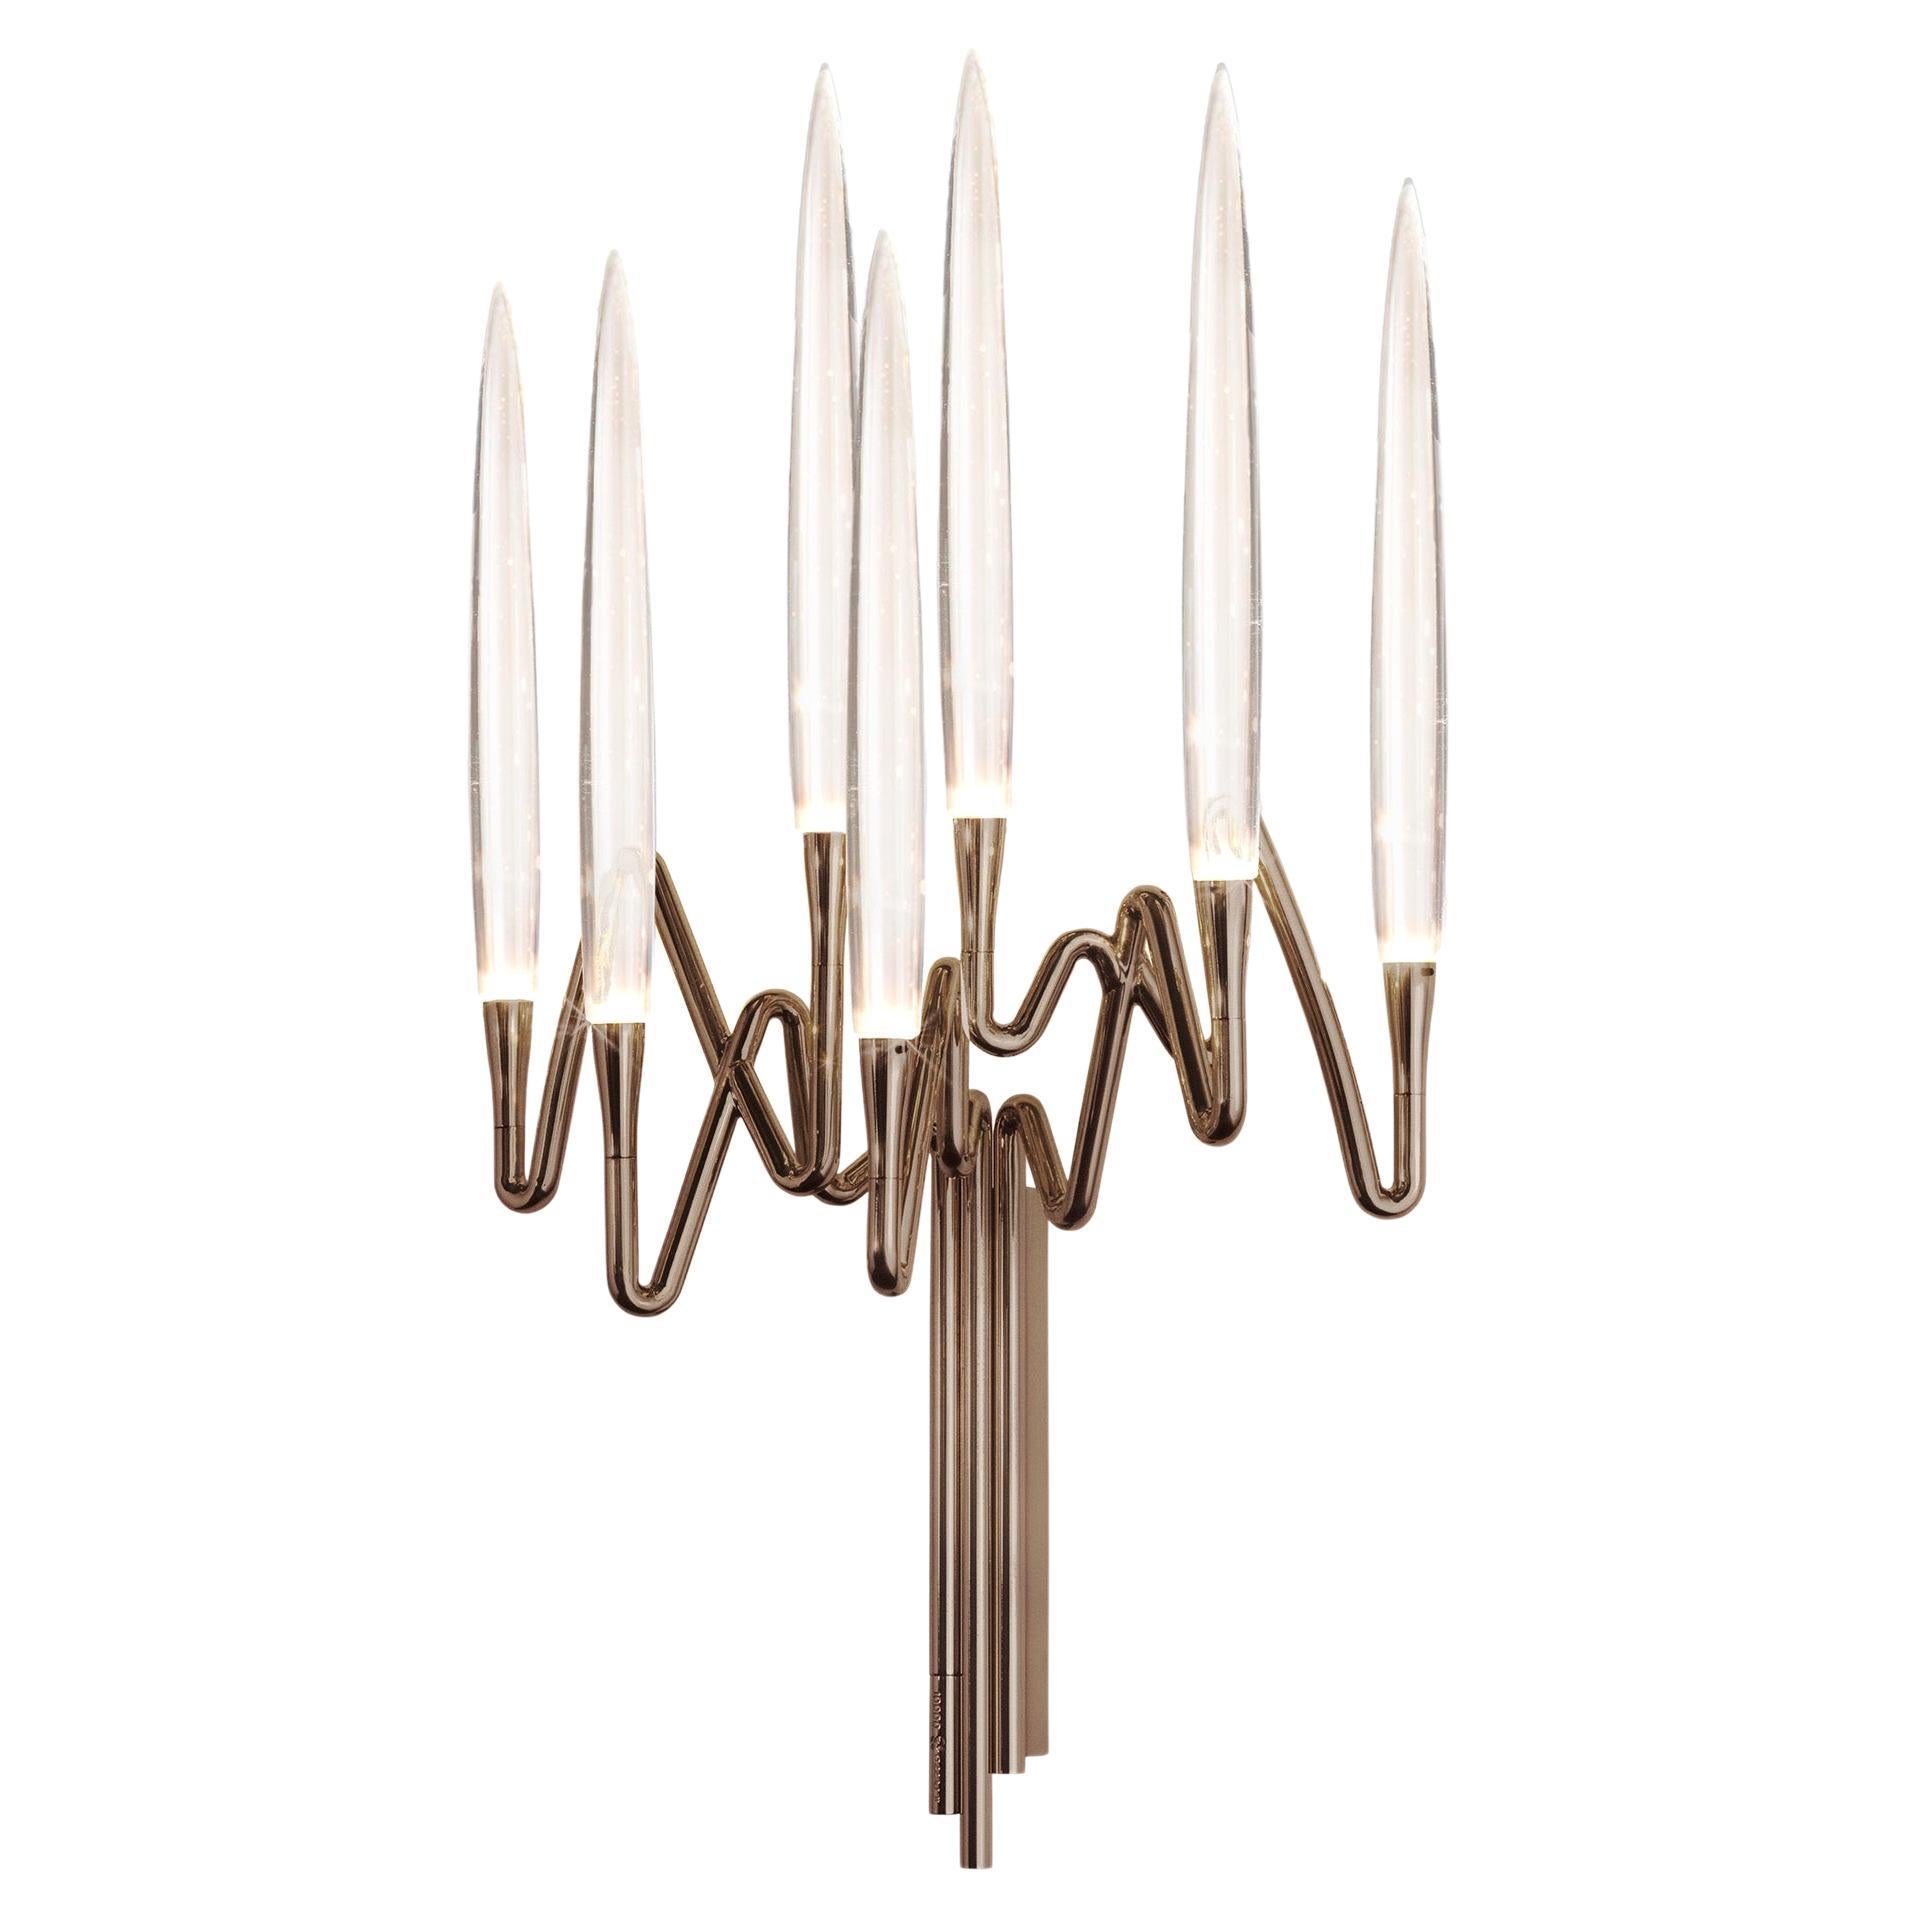 "Il Pezzo 3 Wall Sconce" - width 39cm/15.3" - bronze - crystal - LEDs For Sale